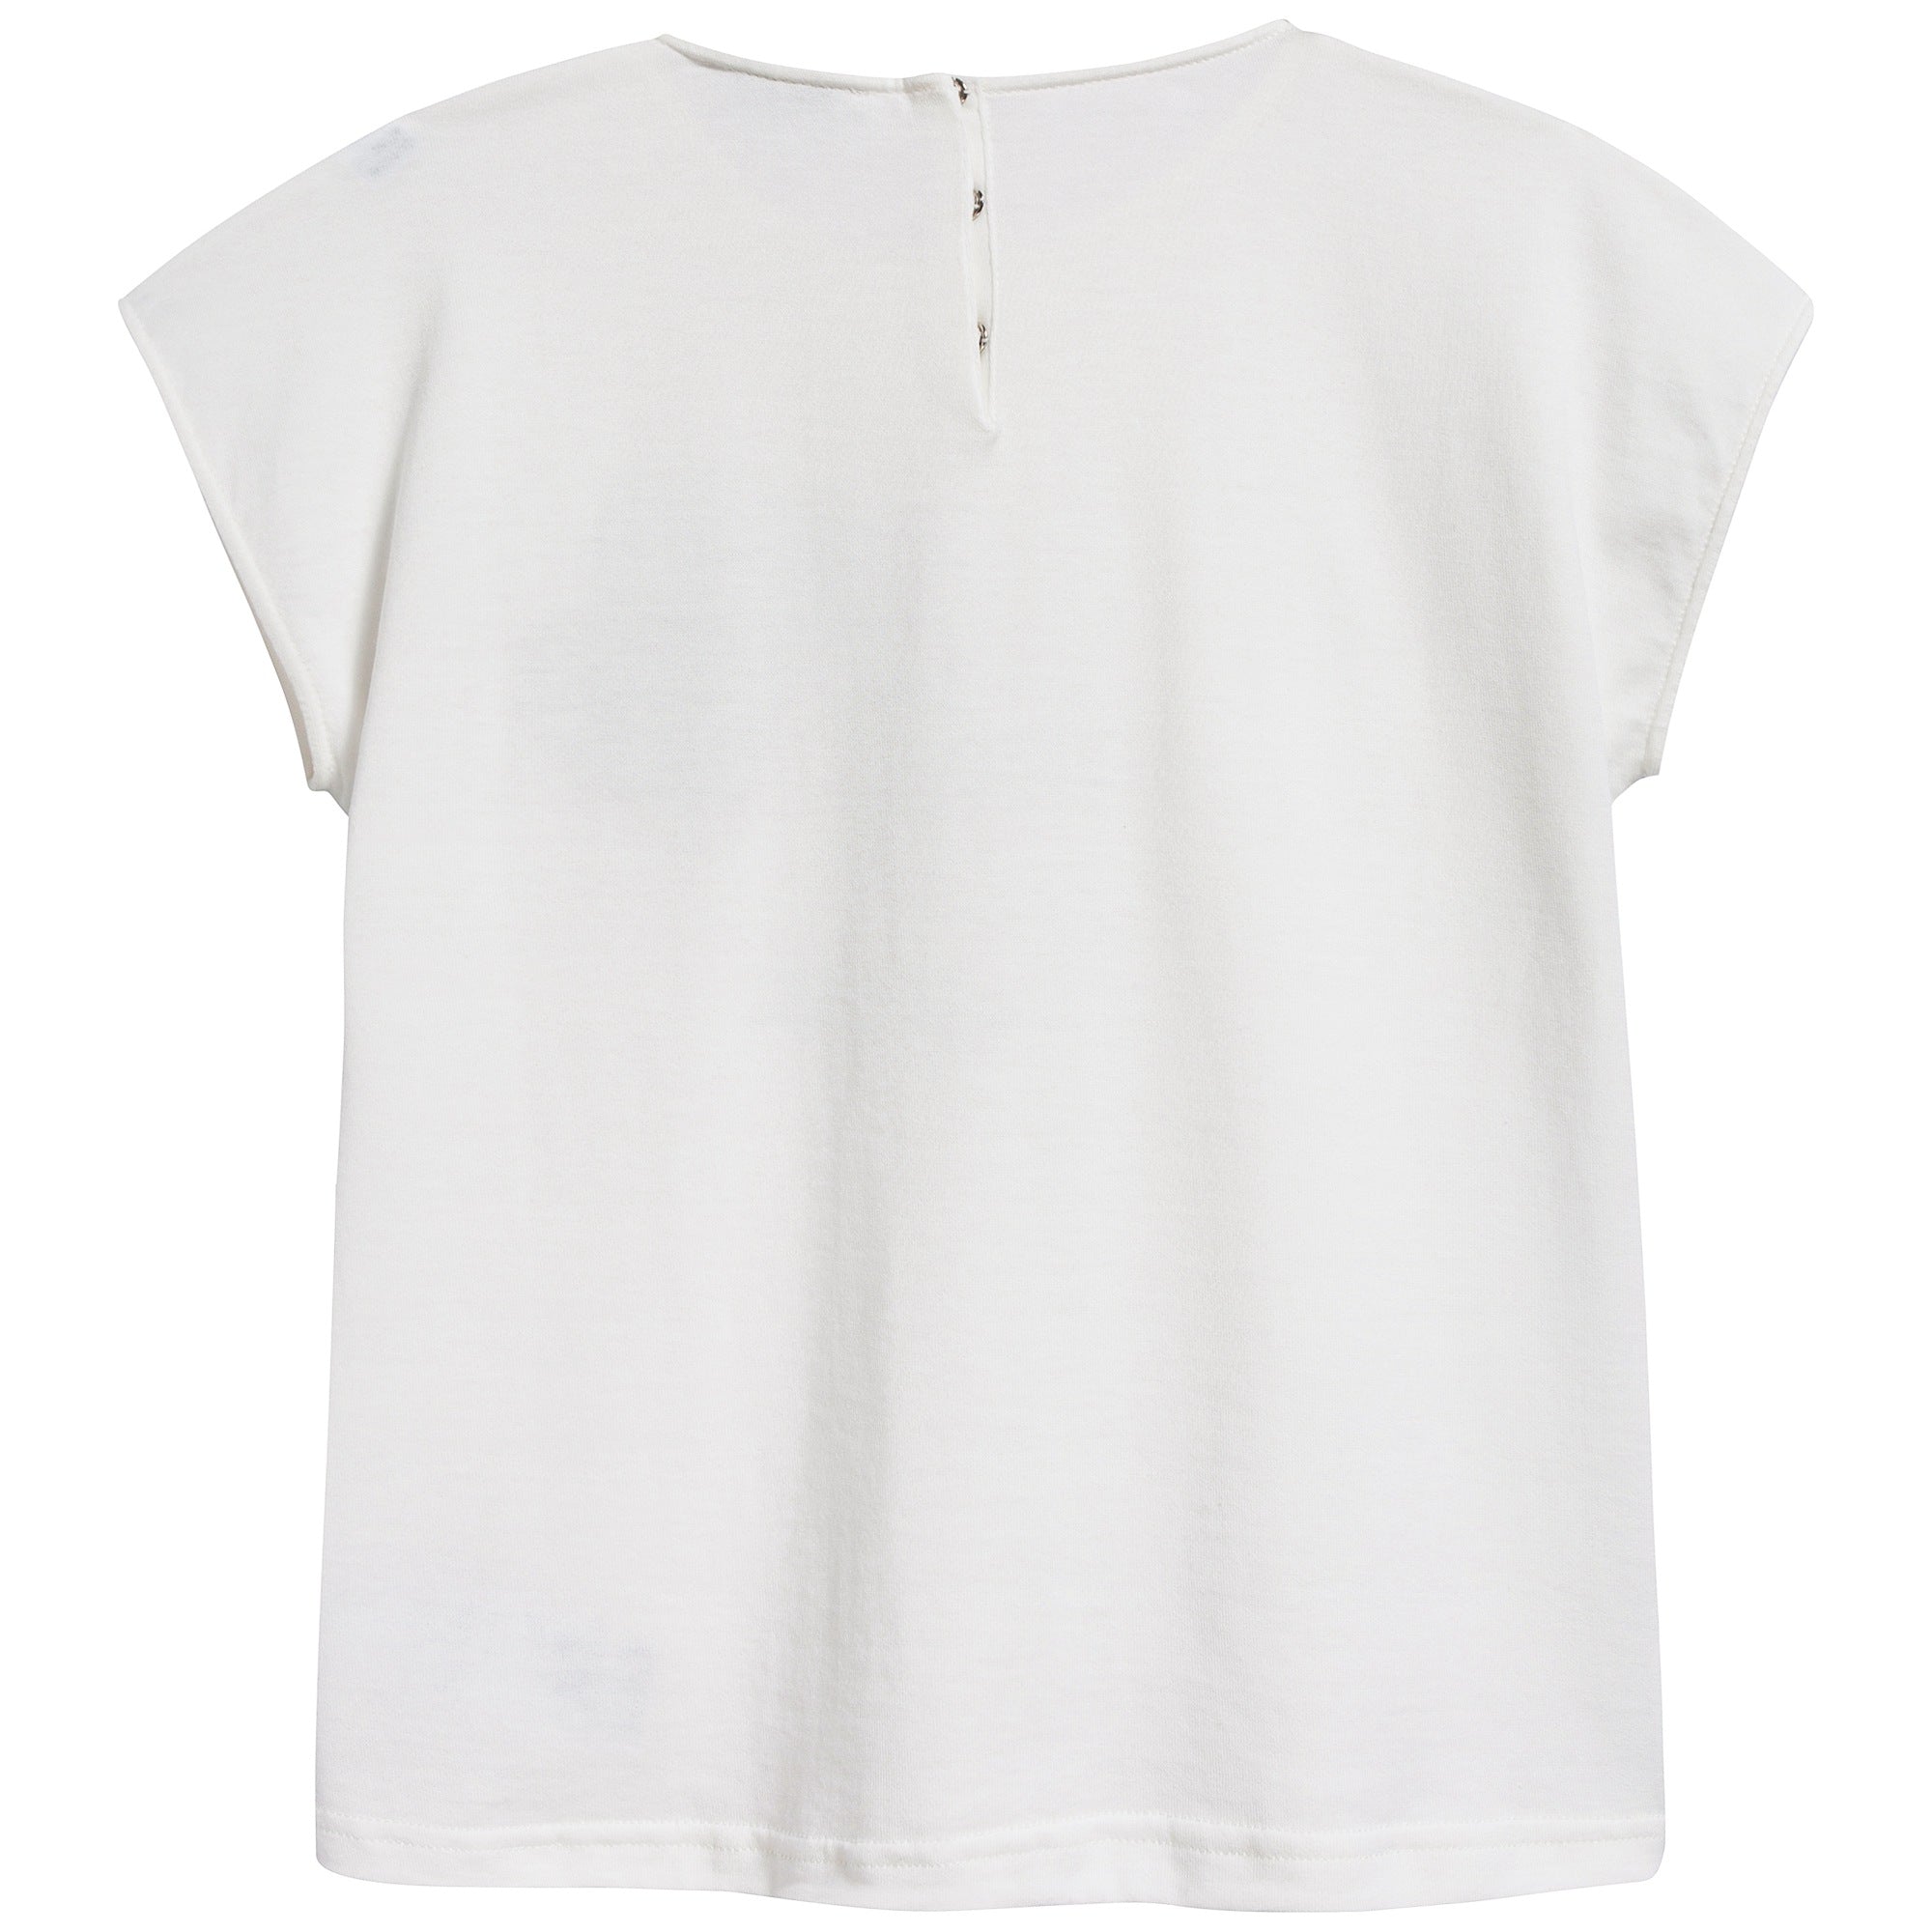 Girls White Embroidered Cotton T-shirt